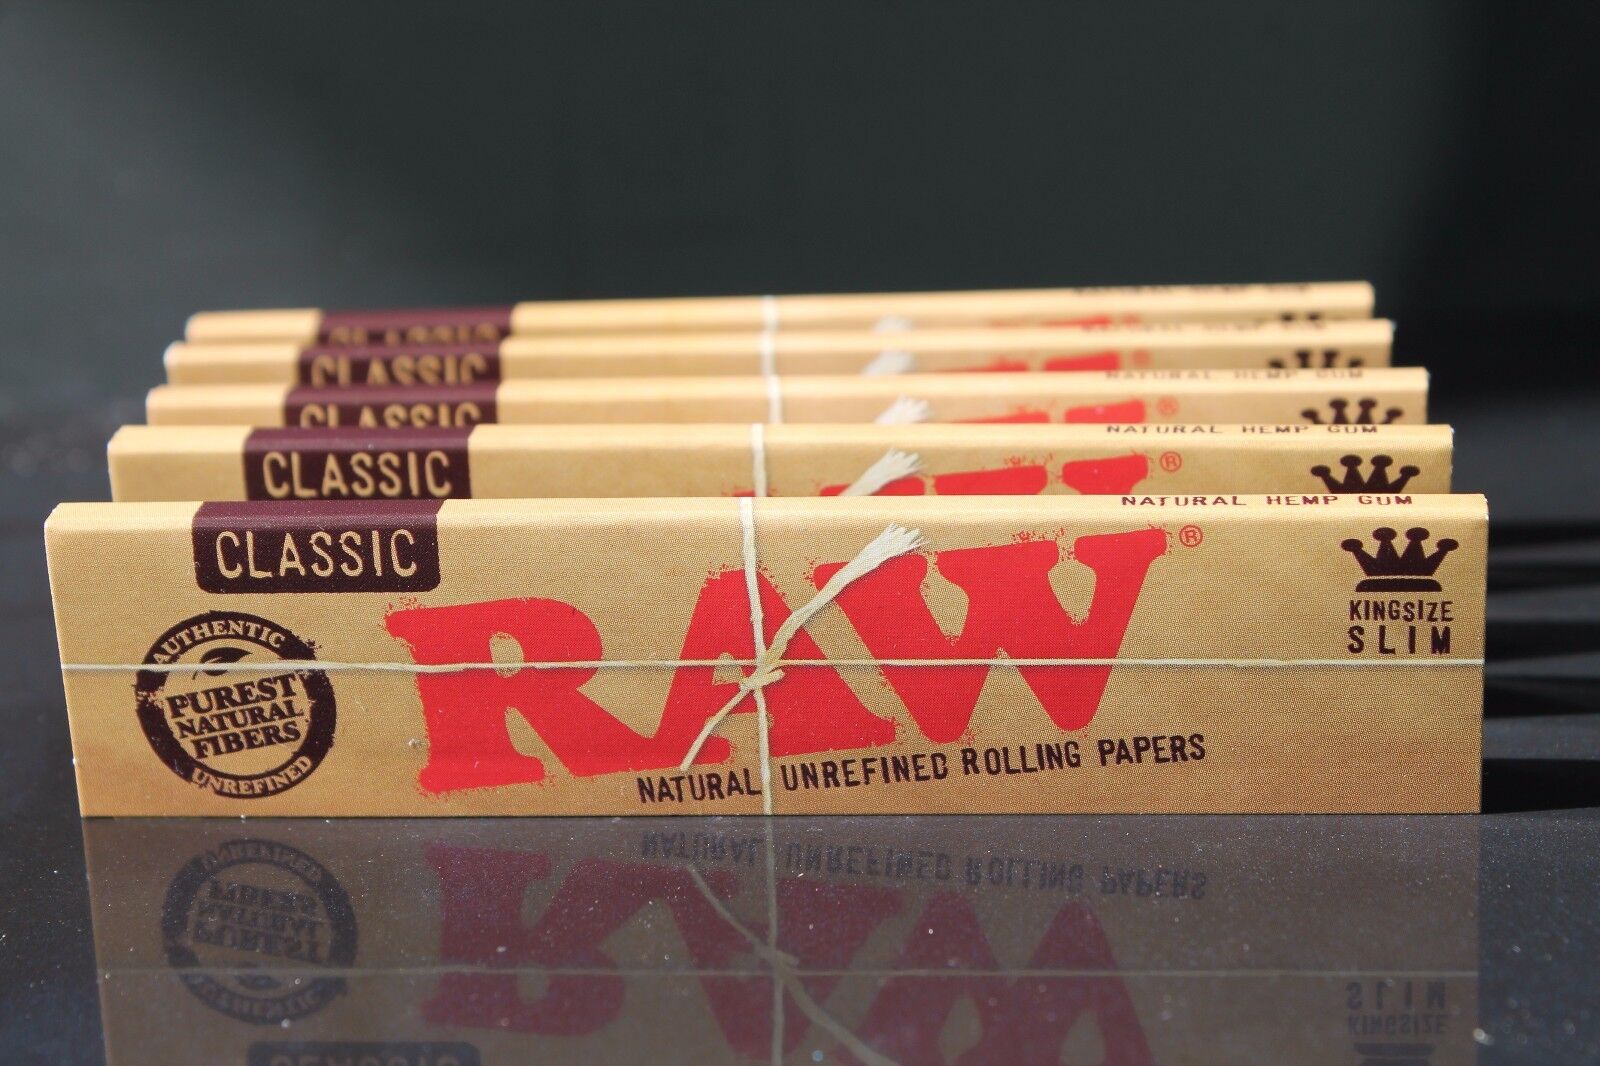 5 PACKS OF AUTHENTIC RAW ROLLING PAPER CLASSIC KING SIZE SLIM NATURAL